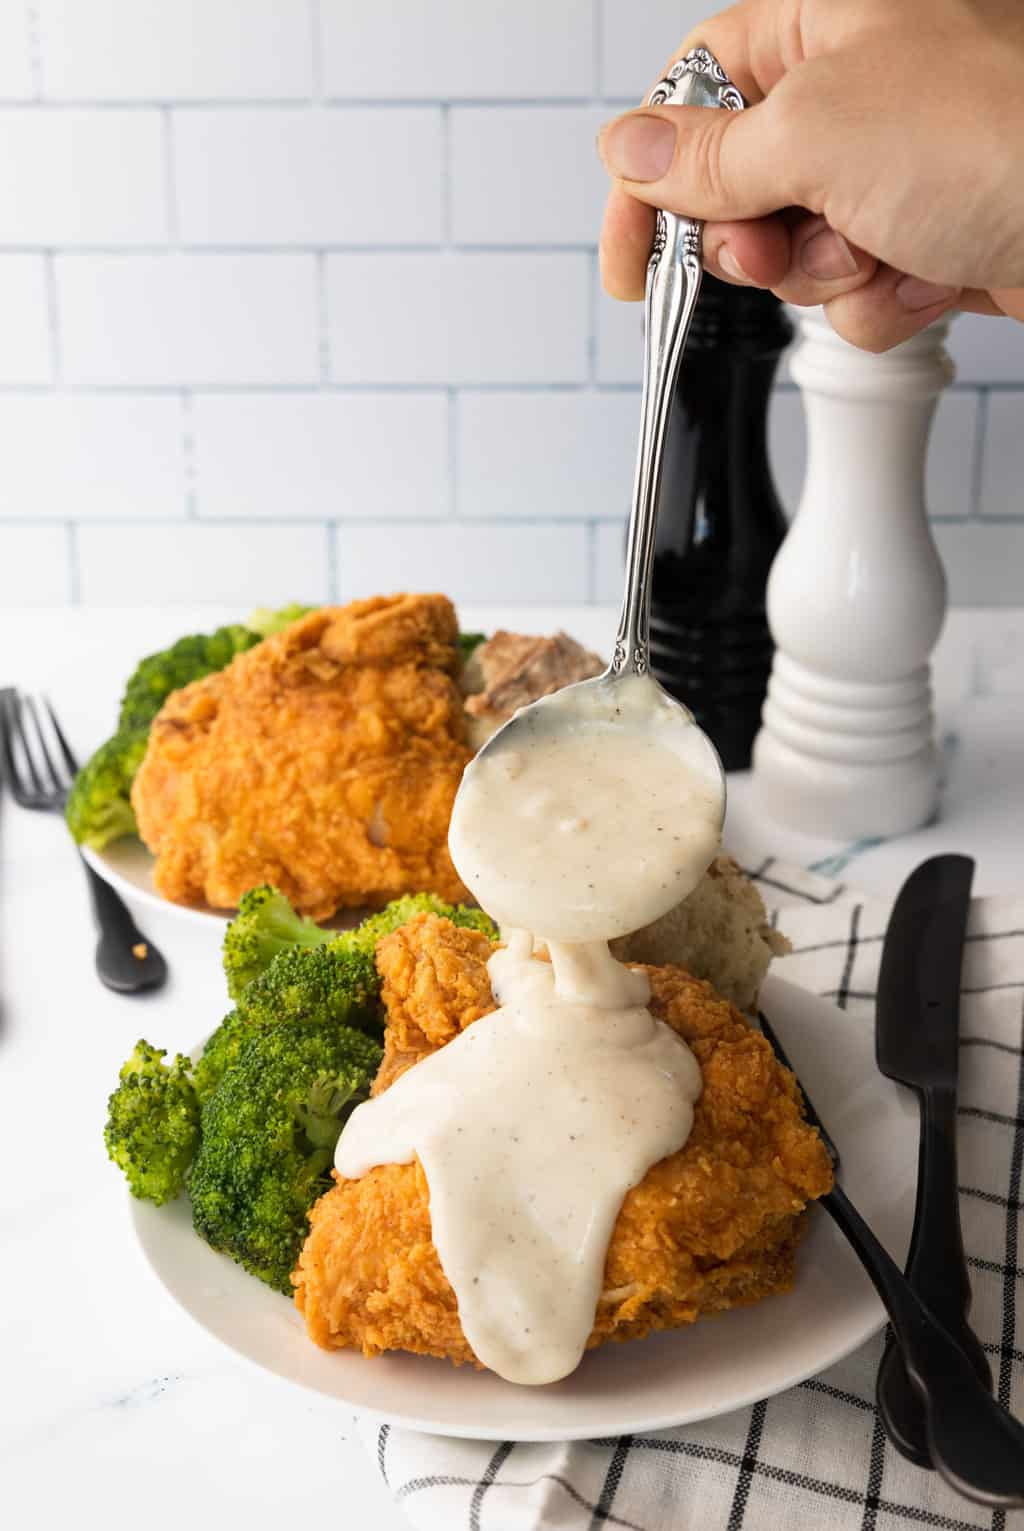 Country Gravy Recipe - photo of the white country gravy served with fried chicken